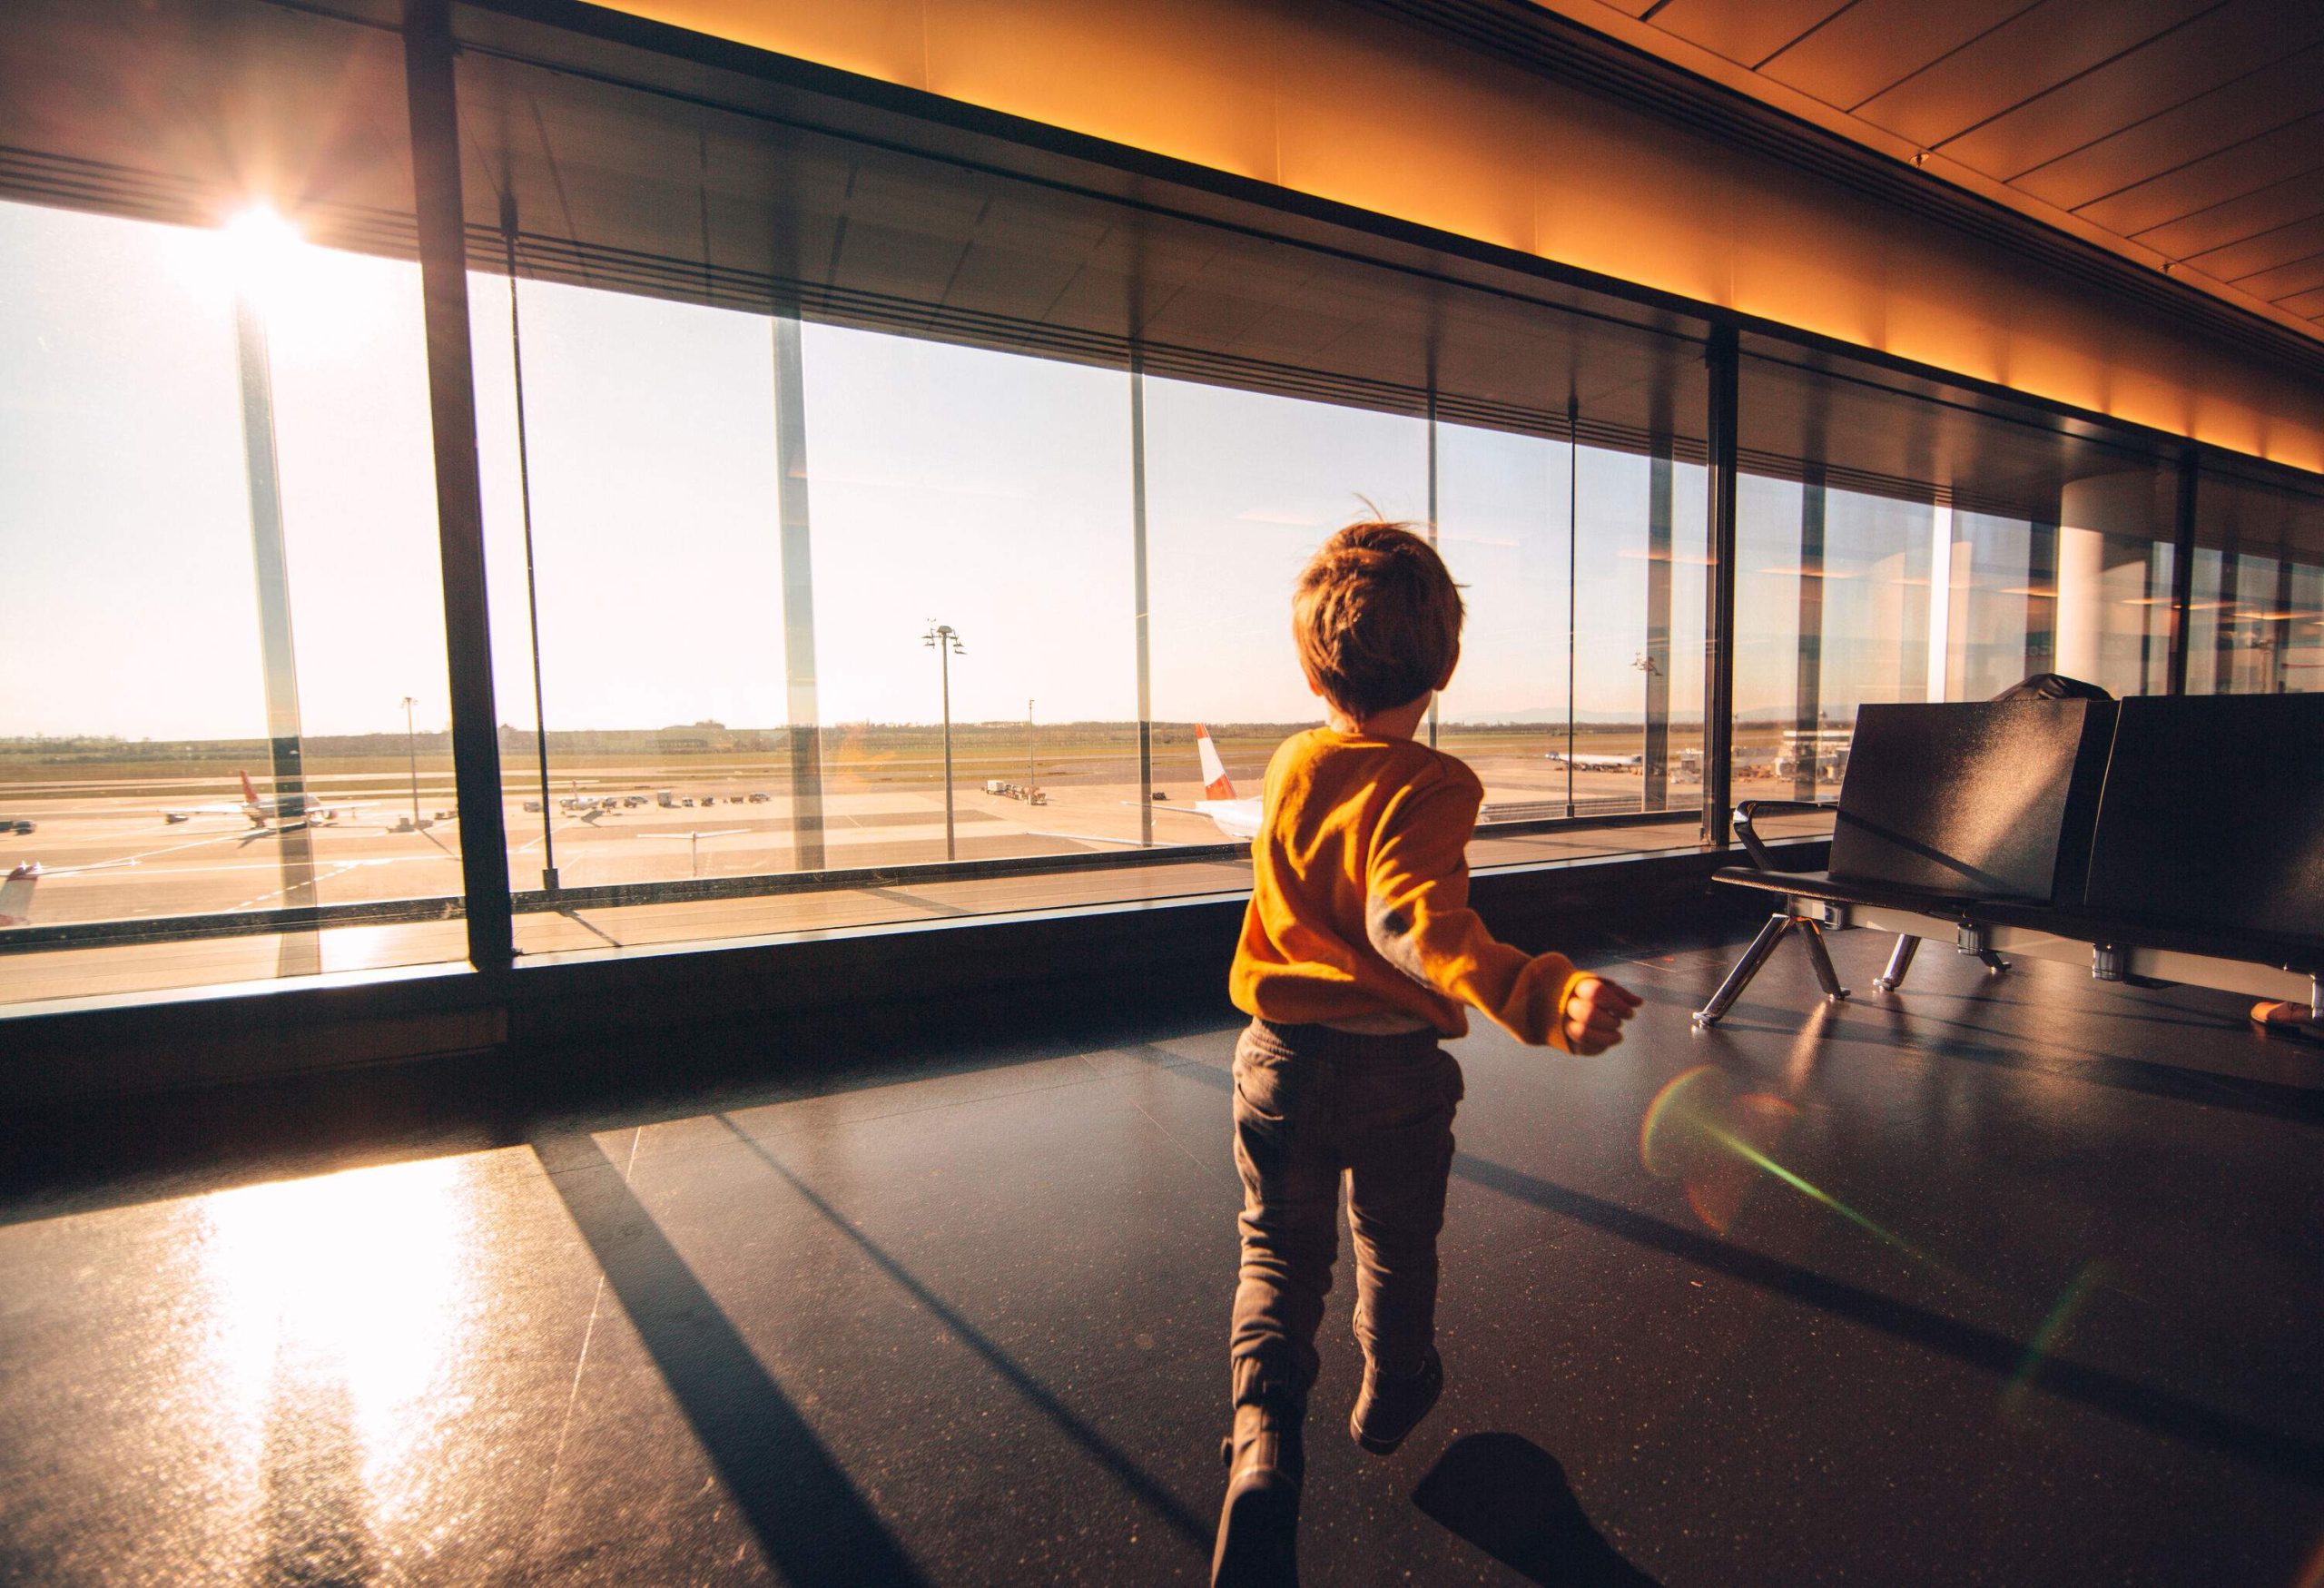 A young child in orange sweater runs on an airport lounge with large windows.